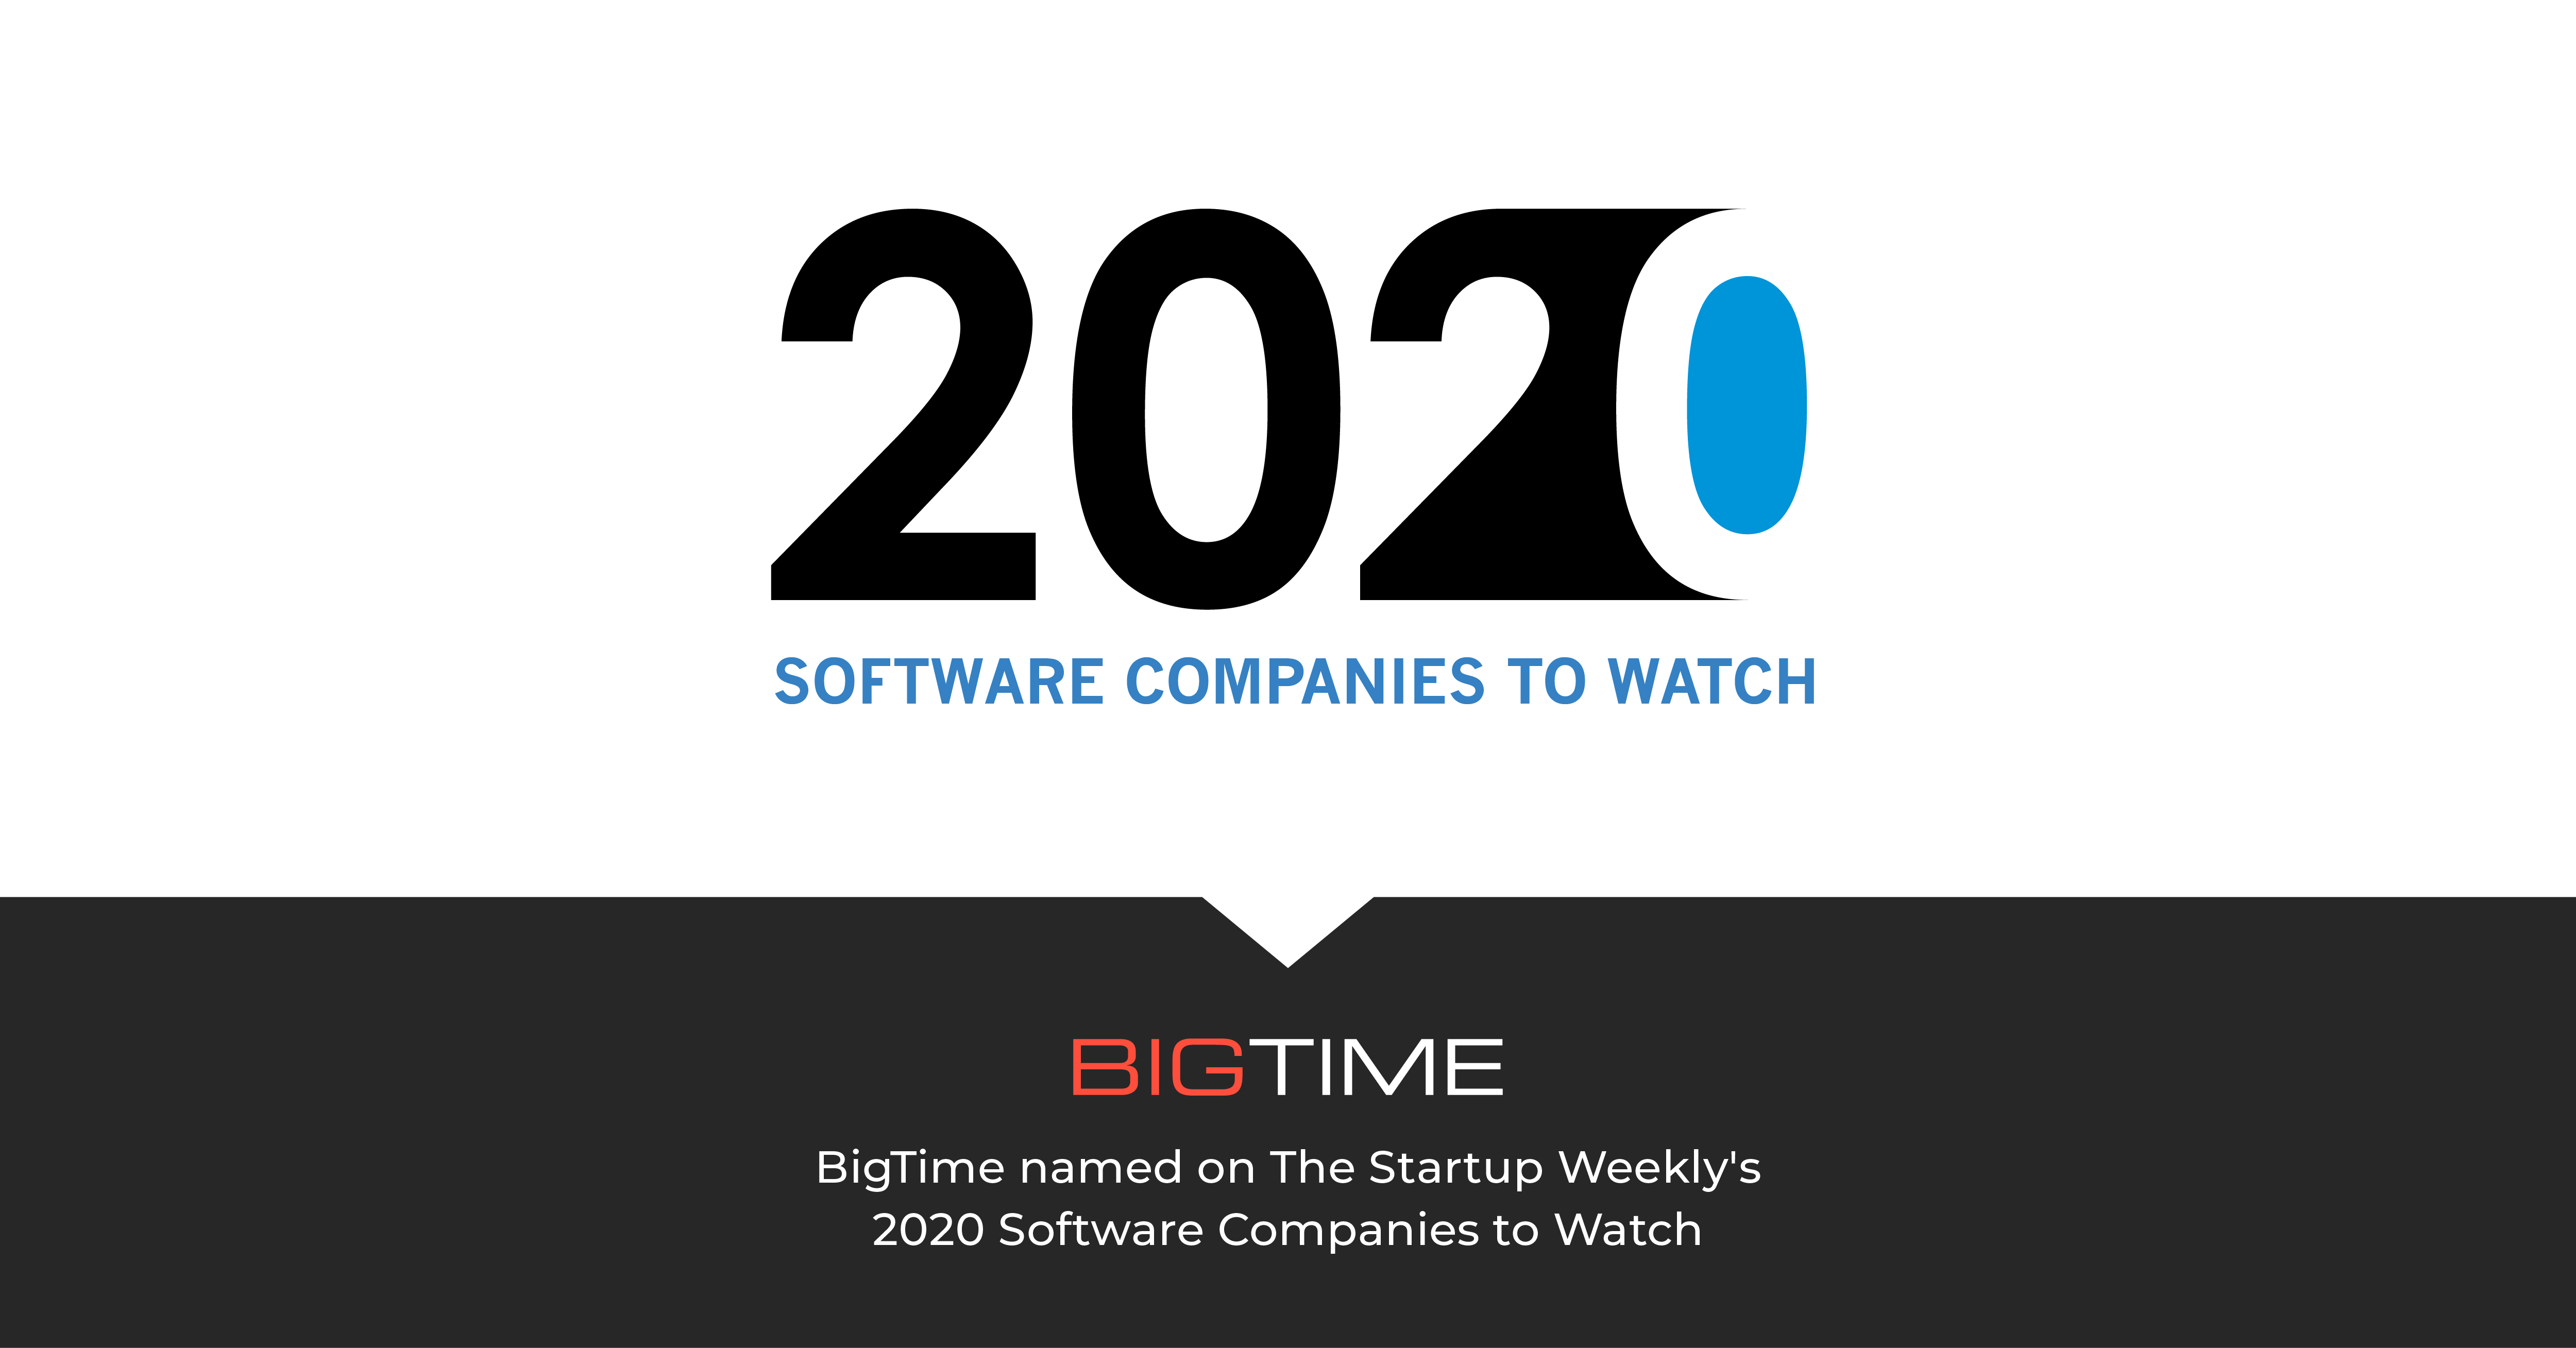 BigTime Software Recognized as One of Startup Weeklys 2020 Software Companies to Watch